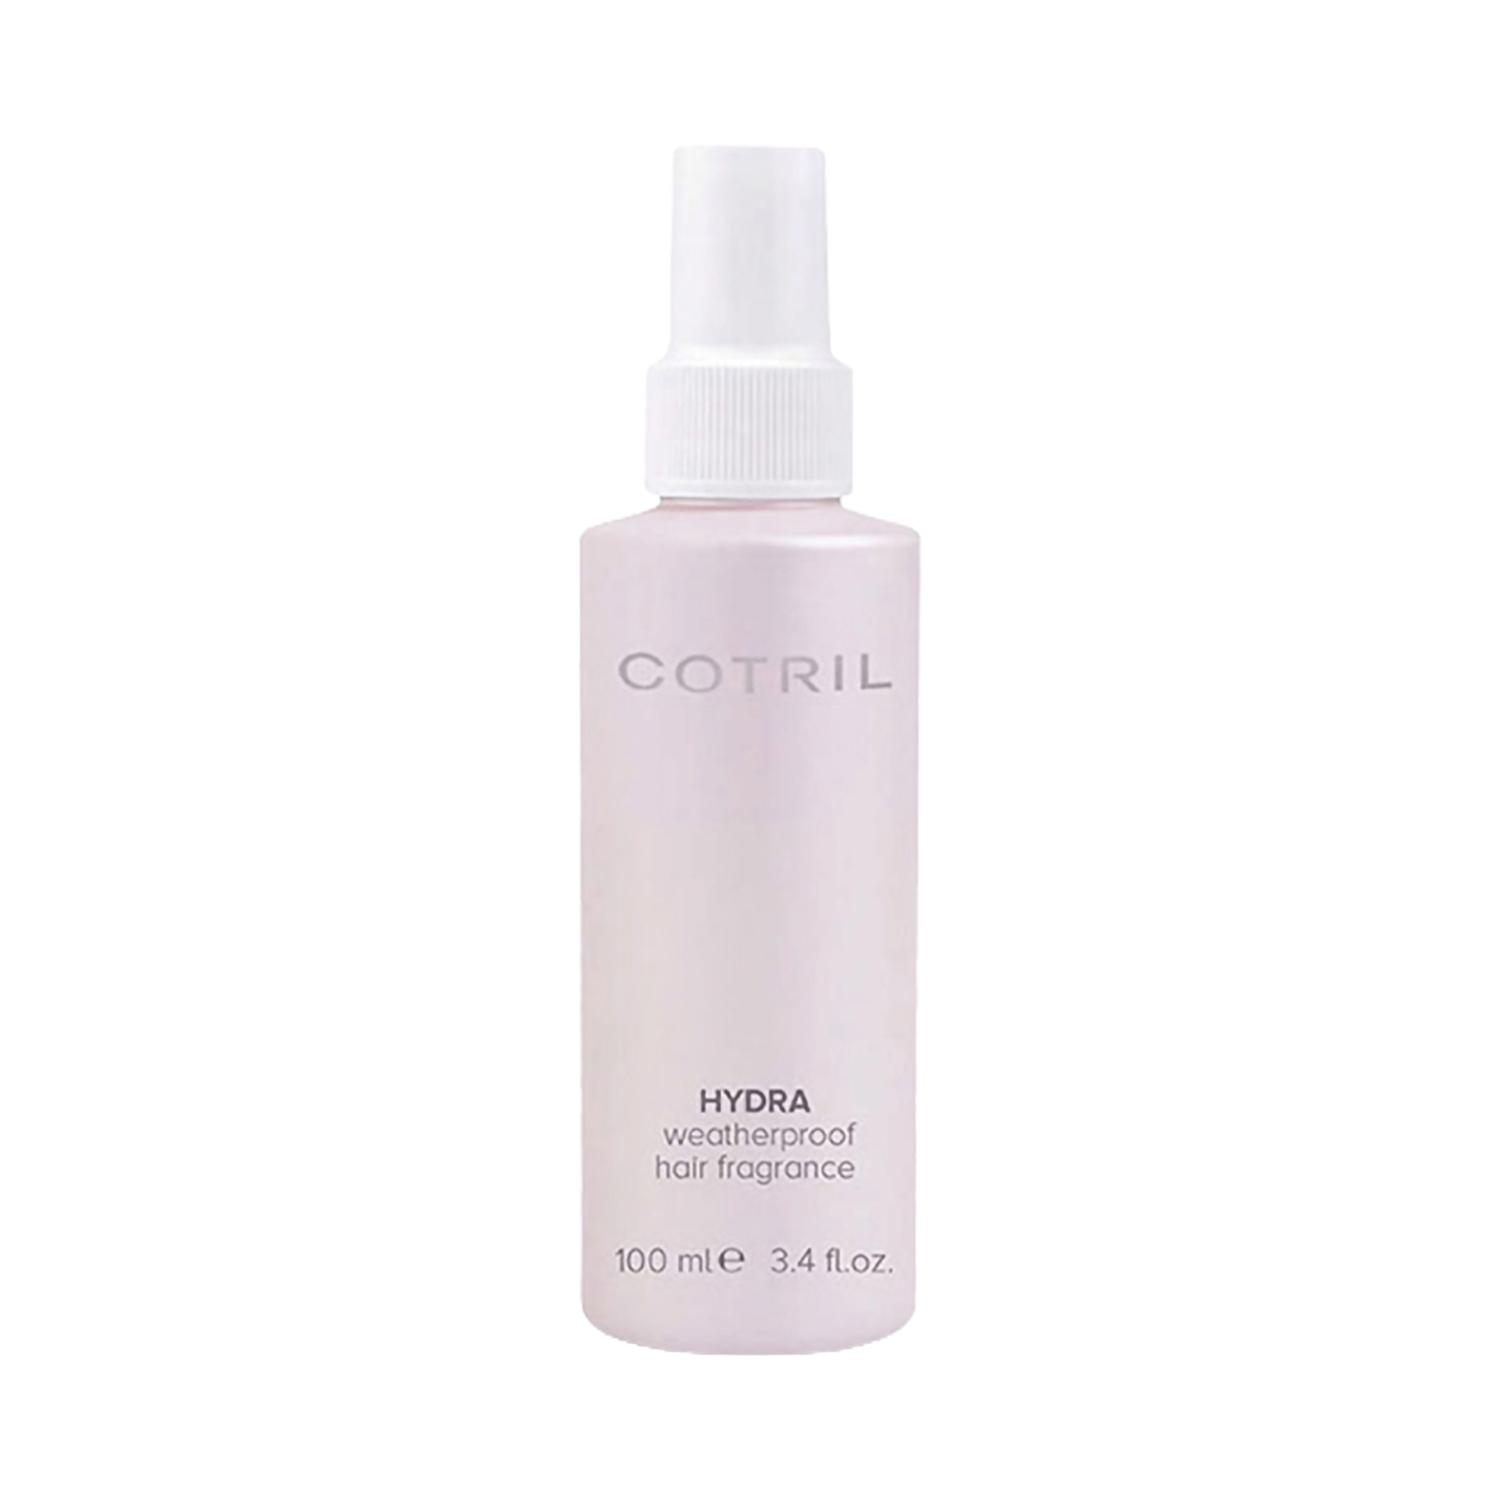 COTRIL | COTRIL Hydra Weatherproof Hair Fragrance Spray (100 ml)